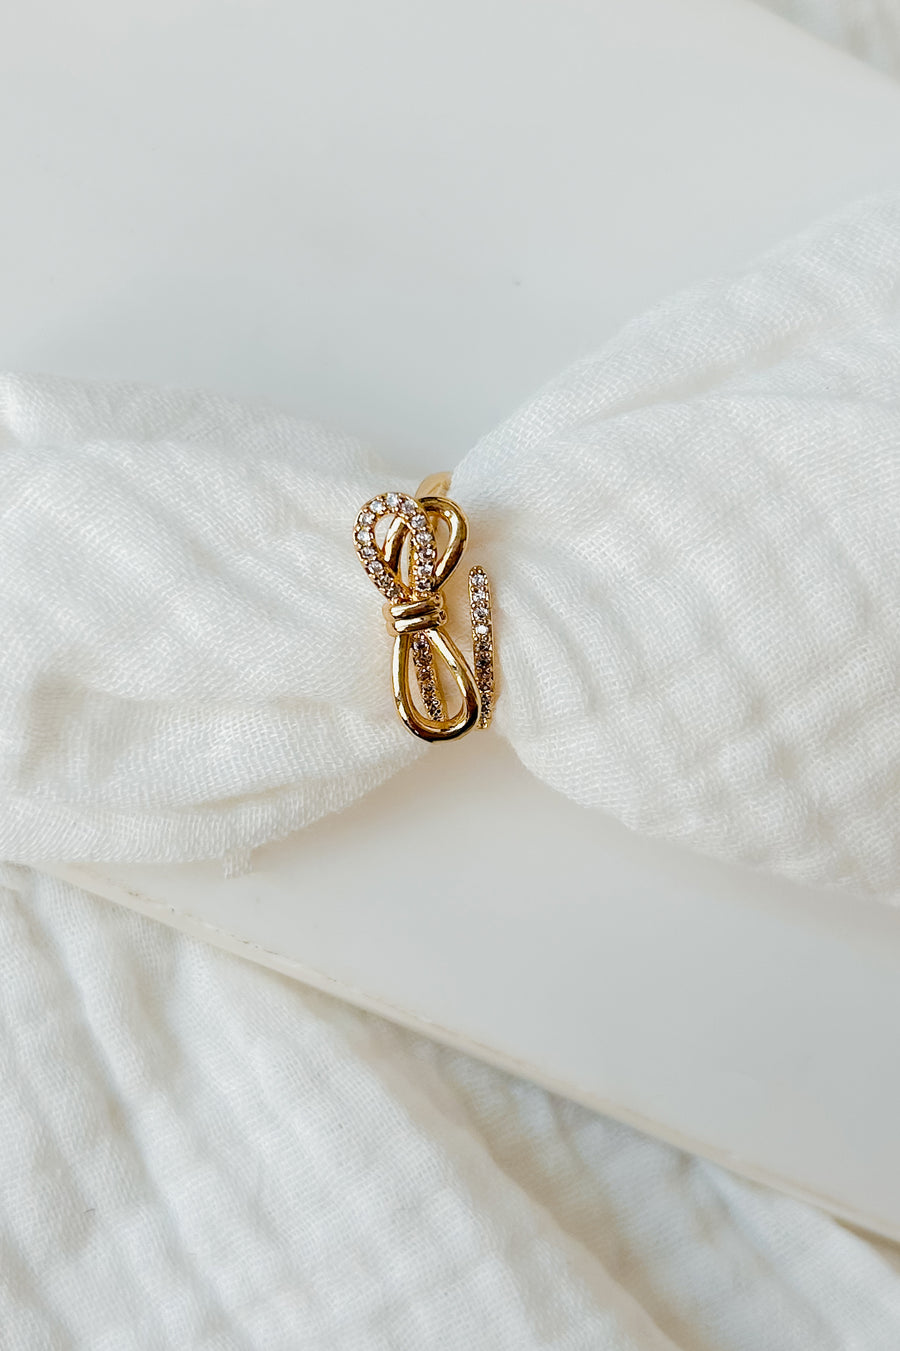 Intertwined Fates Knotted Ring (Gold) - NanaMacs